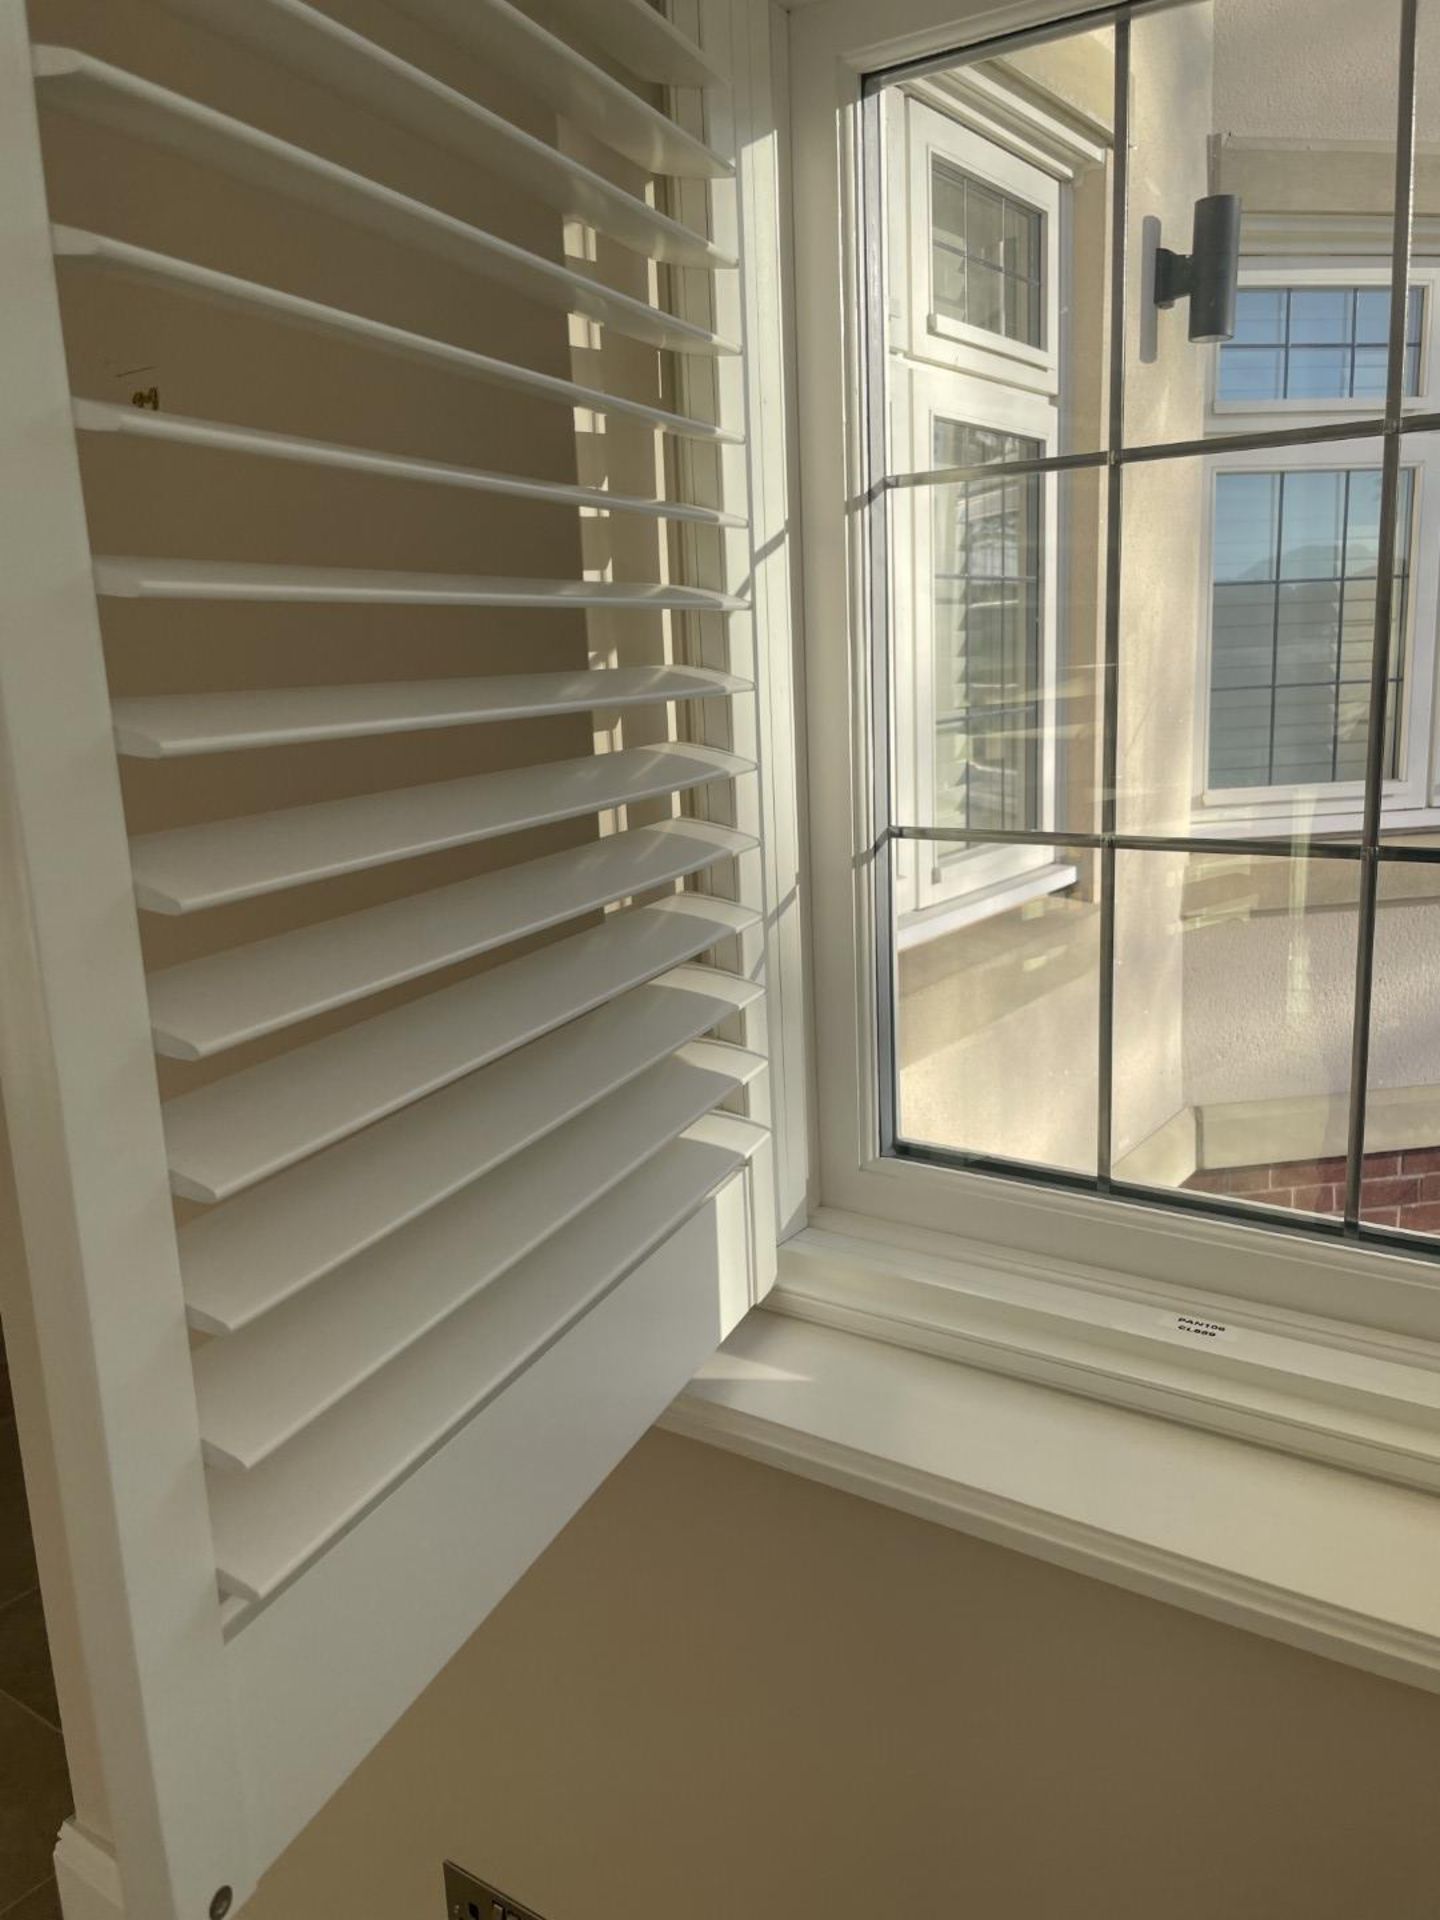 1 x Hardwood Timber Double Glazed Window Frames fitted with Shutter Blinds, In White - Ref: PAN106 - Image 8 of 23